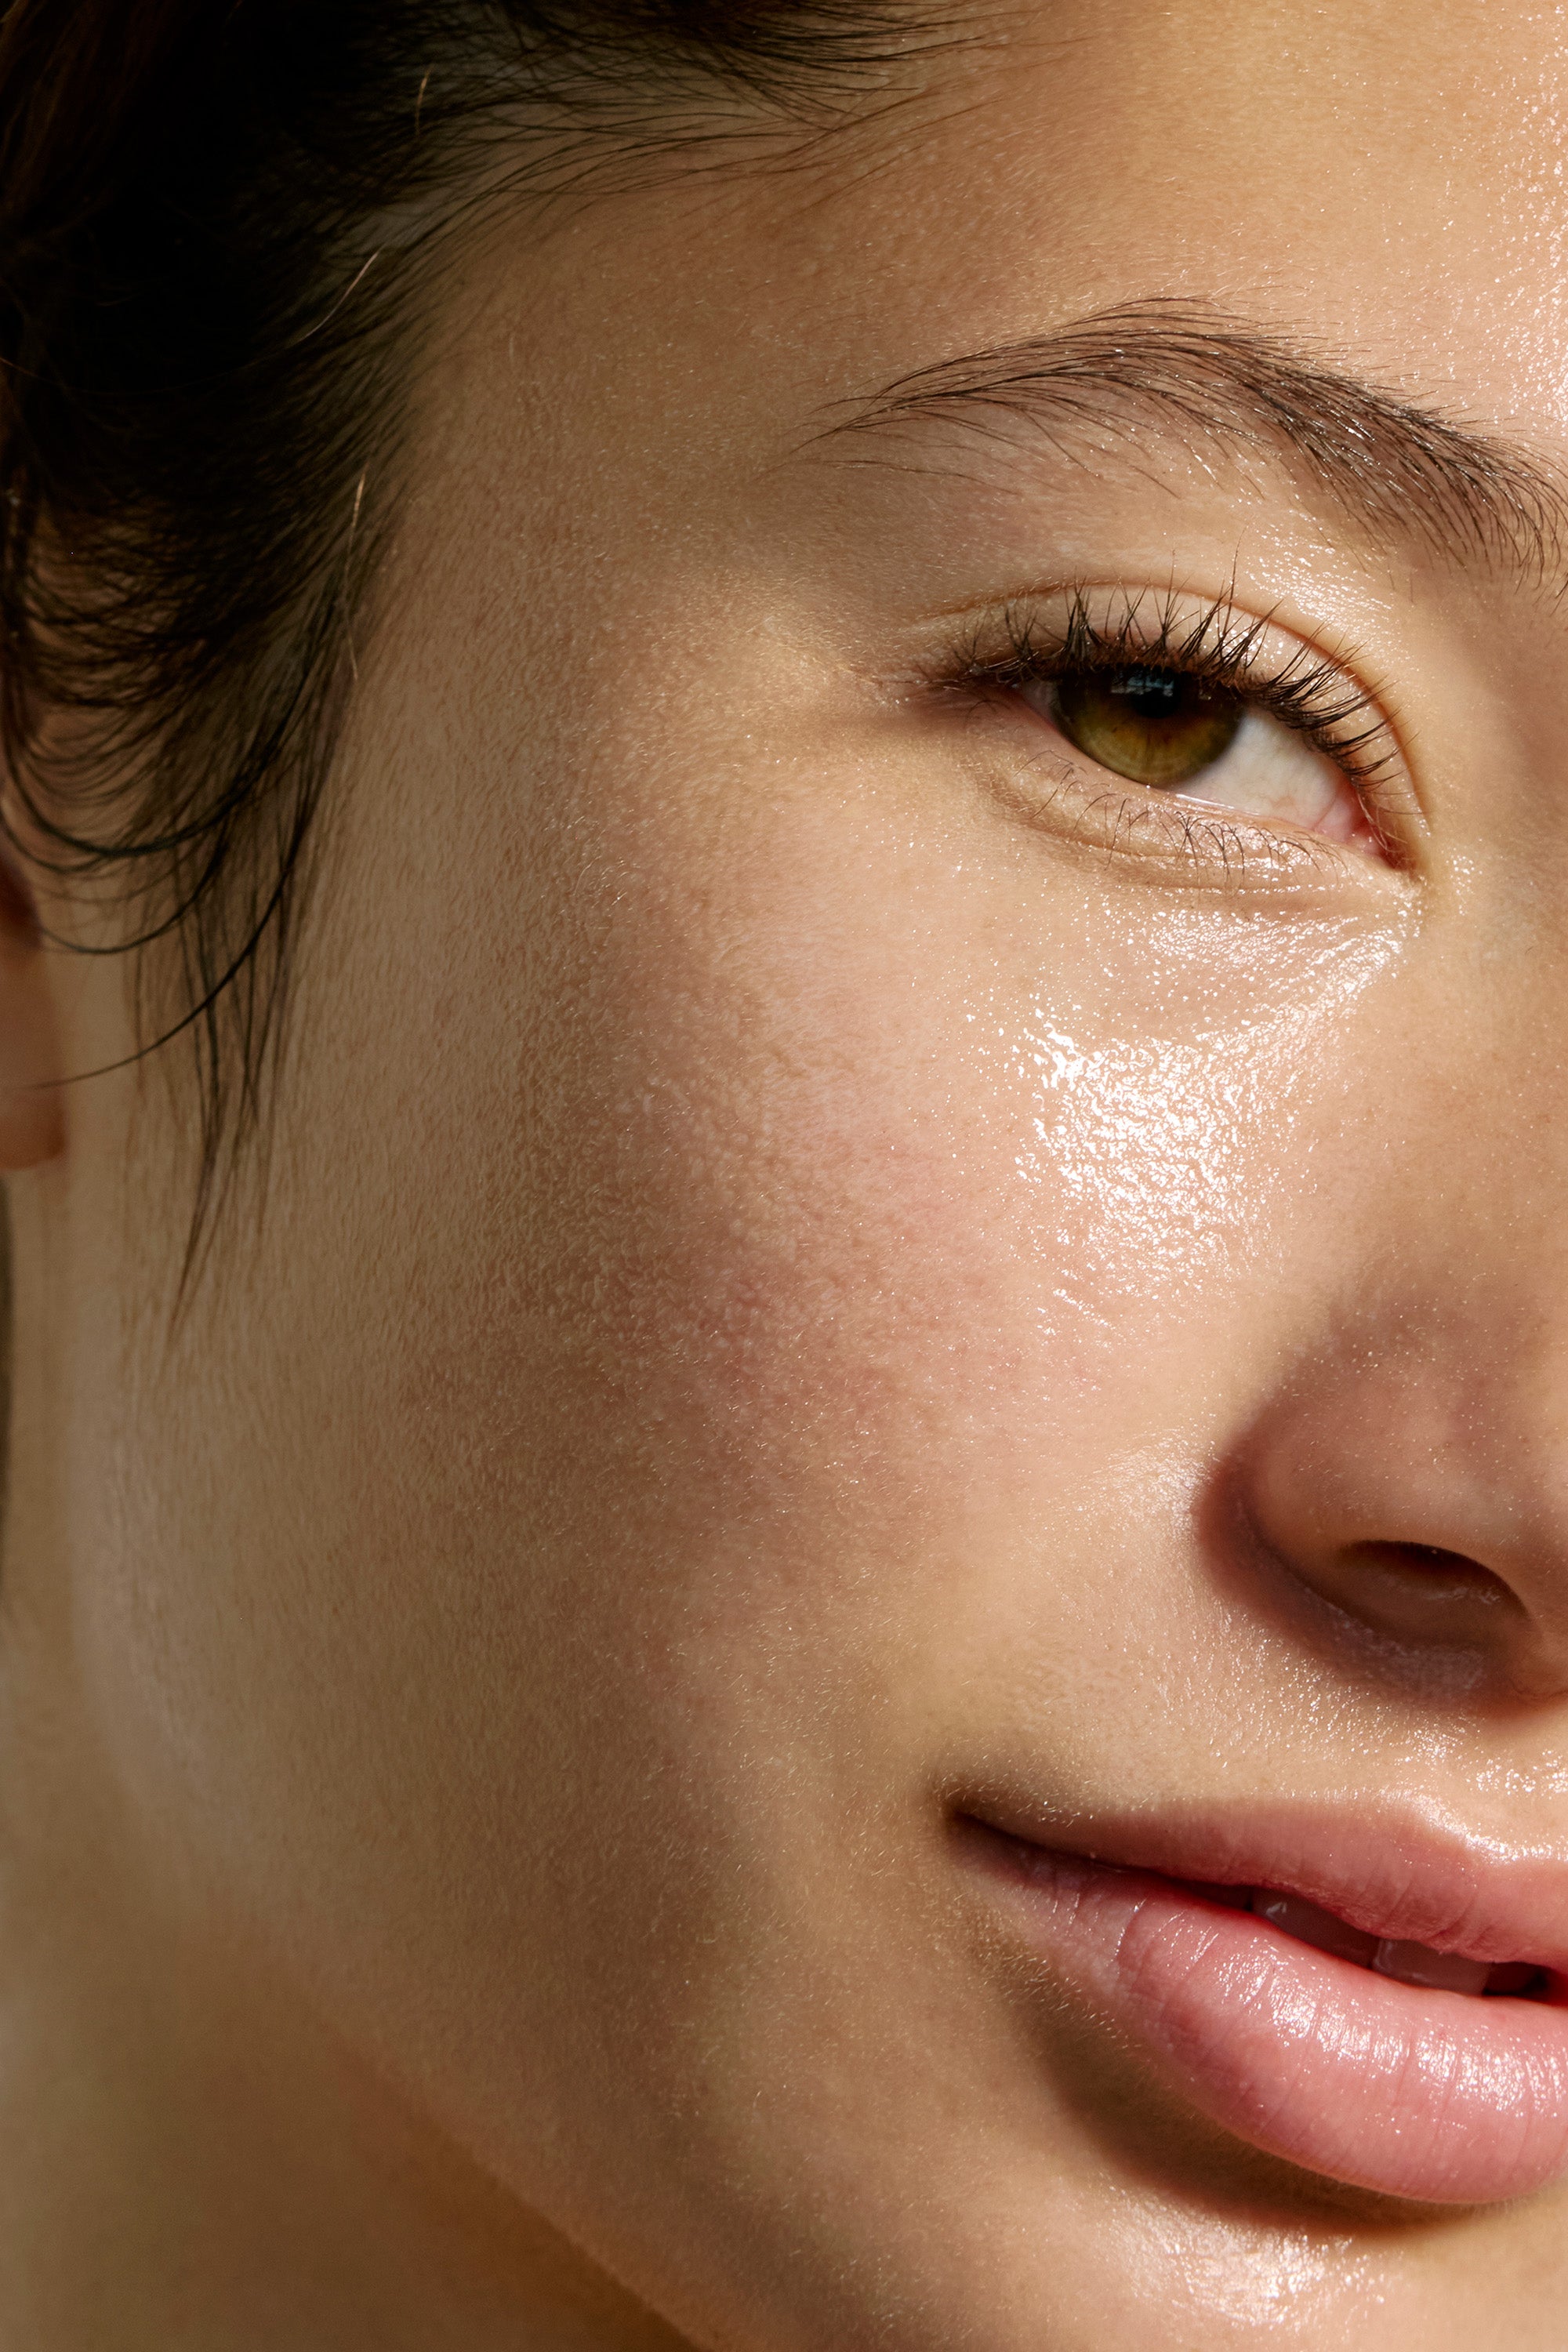 Close-up of a person's face with dewy, radiant skin. The image highlights the cheek, nose, lips, and one eye, showcasing a smooth, natural complexion. Strands of dark hair frame the face. The lighting emphasizes the skin's luminous texture provided by Deeper Dive Moisturizer from Freaks of Nature Skincare.